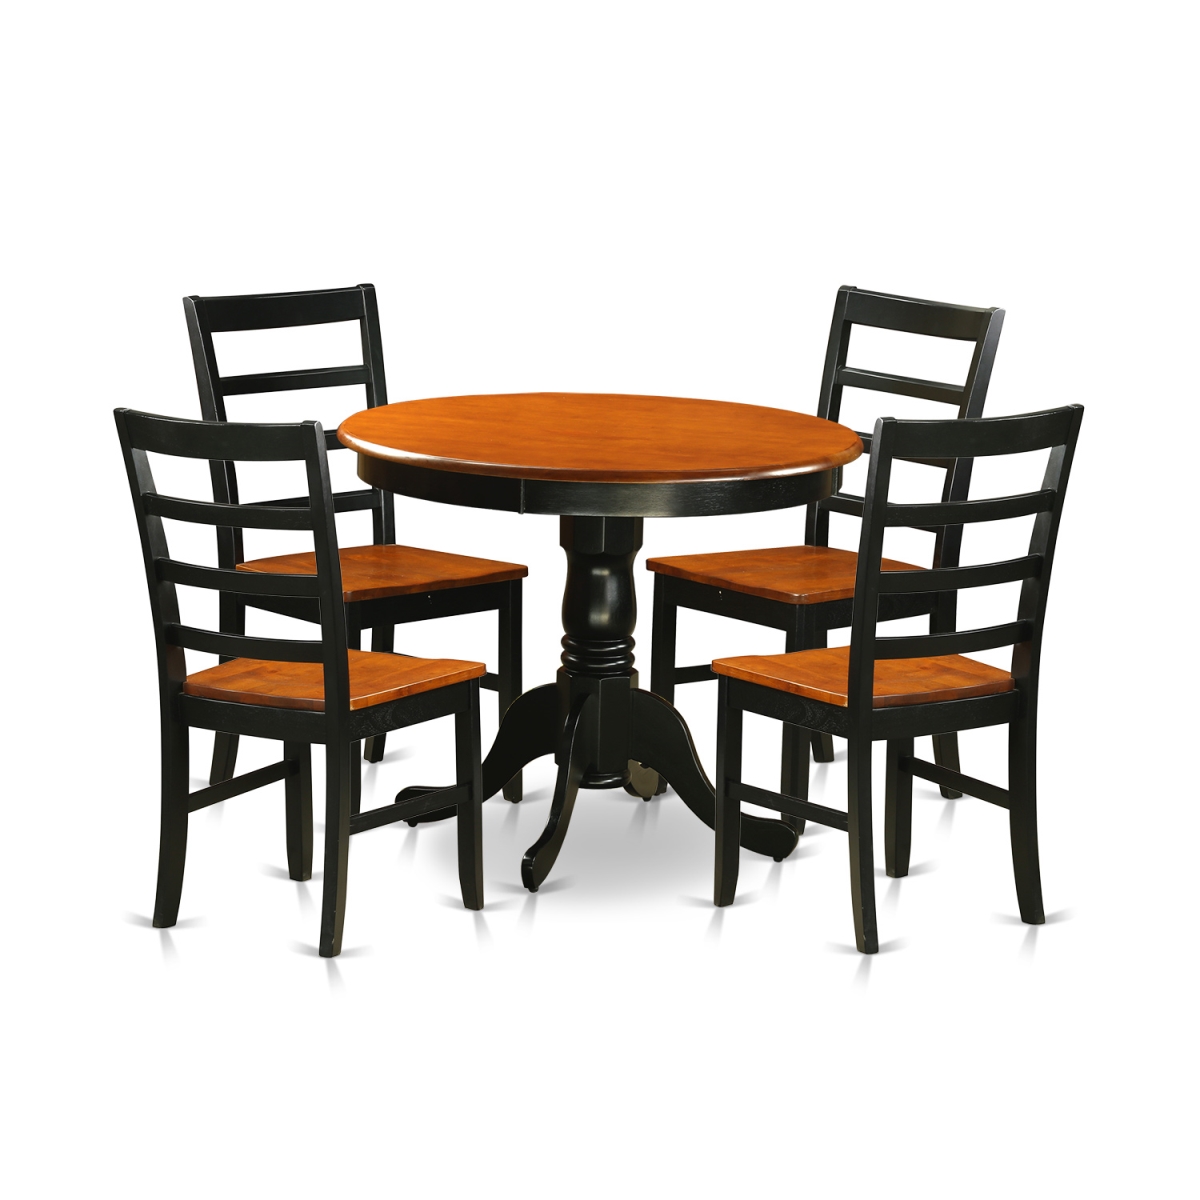 Picture of East West Furniture ANPF5-BLK-W Dining Furniture Set with 4 Wooden Chairs, Black & Cherry - 5 Piece